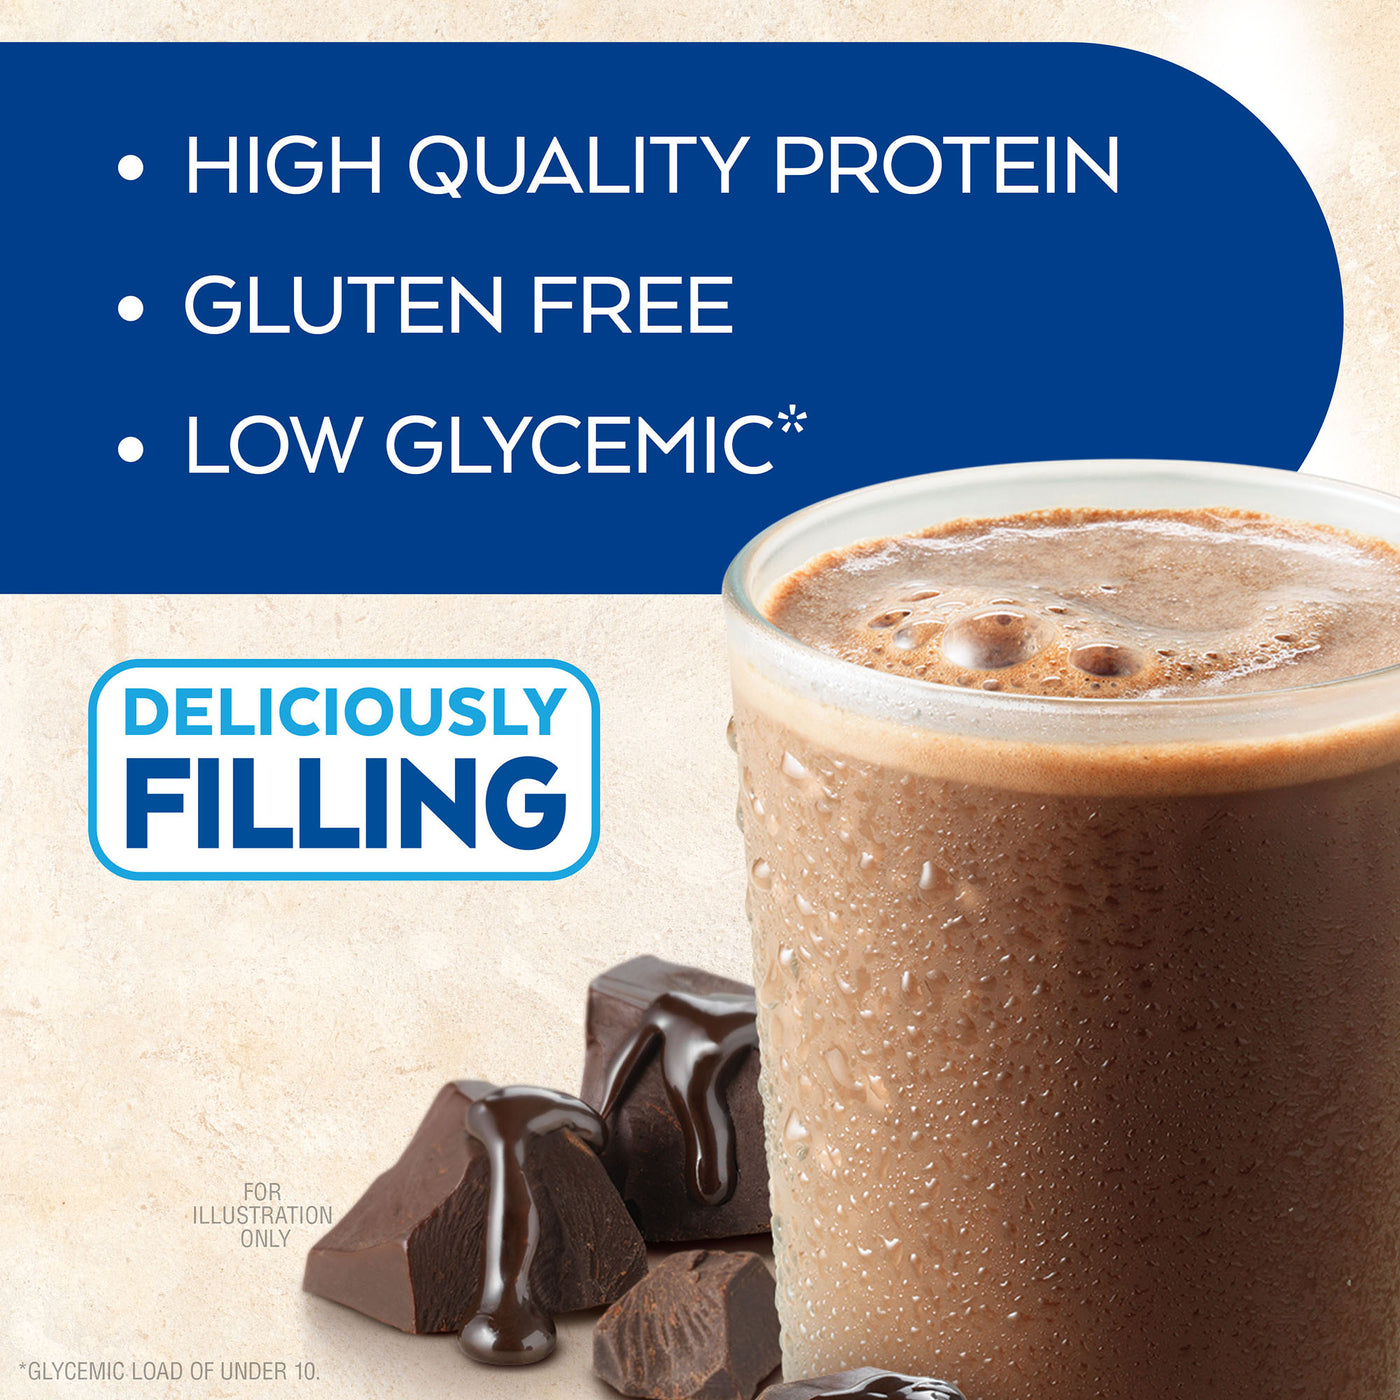 Dark Chocolate Royale Shake; High quality protein. Gluten Free. Low Glycemic*. Deliciously filling. For Illustration only. *Glycemic load of under 10